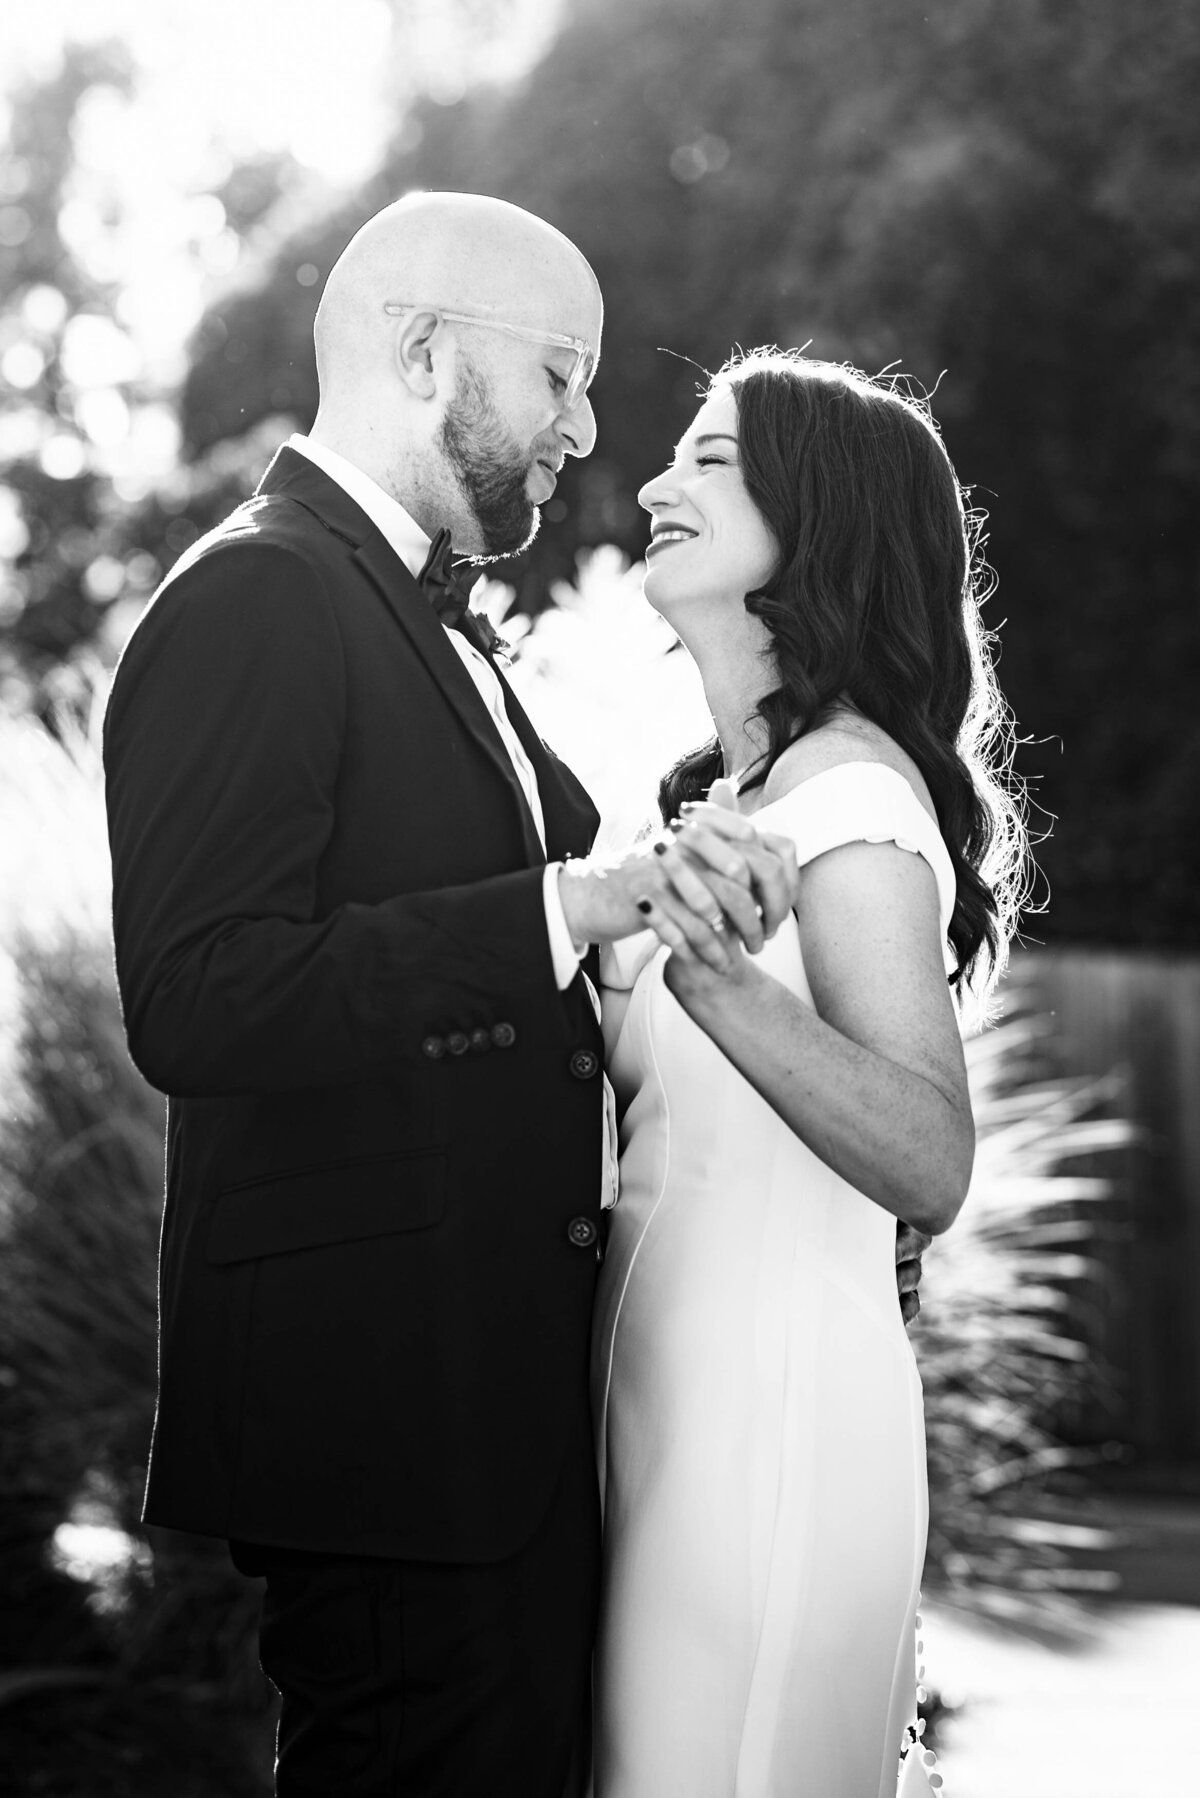 Black and white photograph of bride and groom holding hands dancing and smiling at one another outdoors in Atlanta by Charlotte wedding photographers DeLong Photography